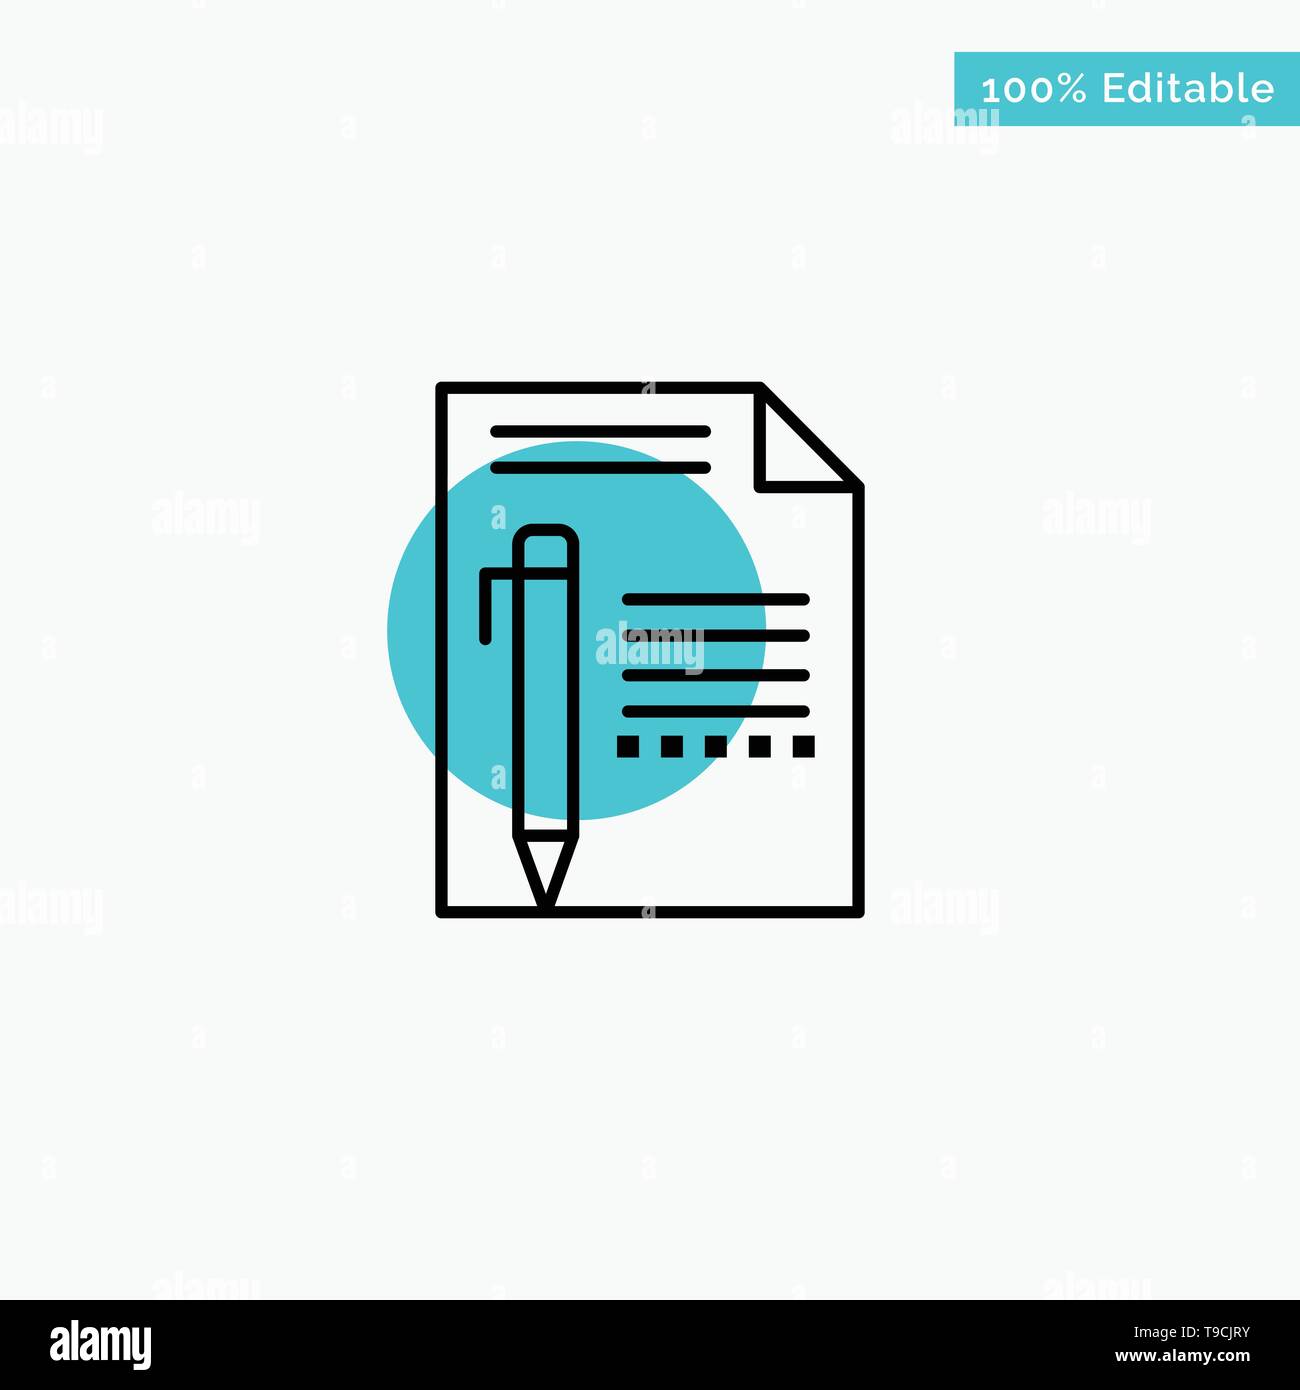 Document, Edit, Page, Paper, Pencil, Write turquoise highlight circle point Vector icon Stock Vector